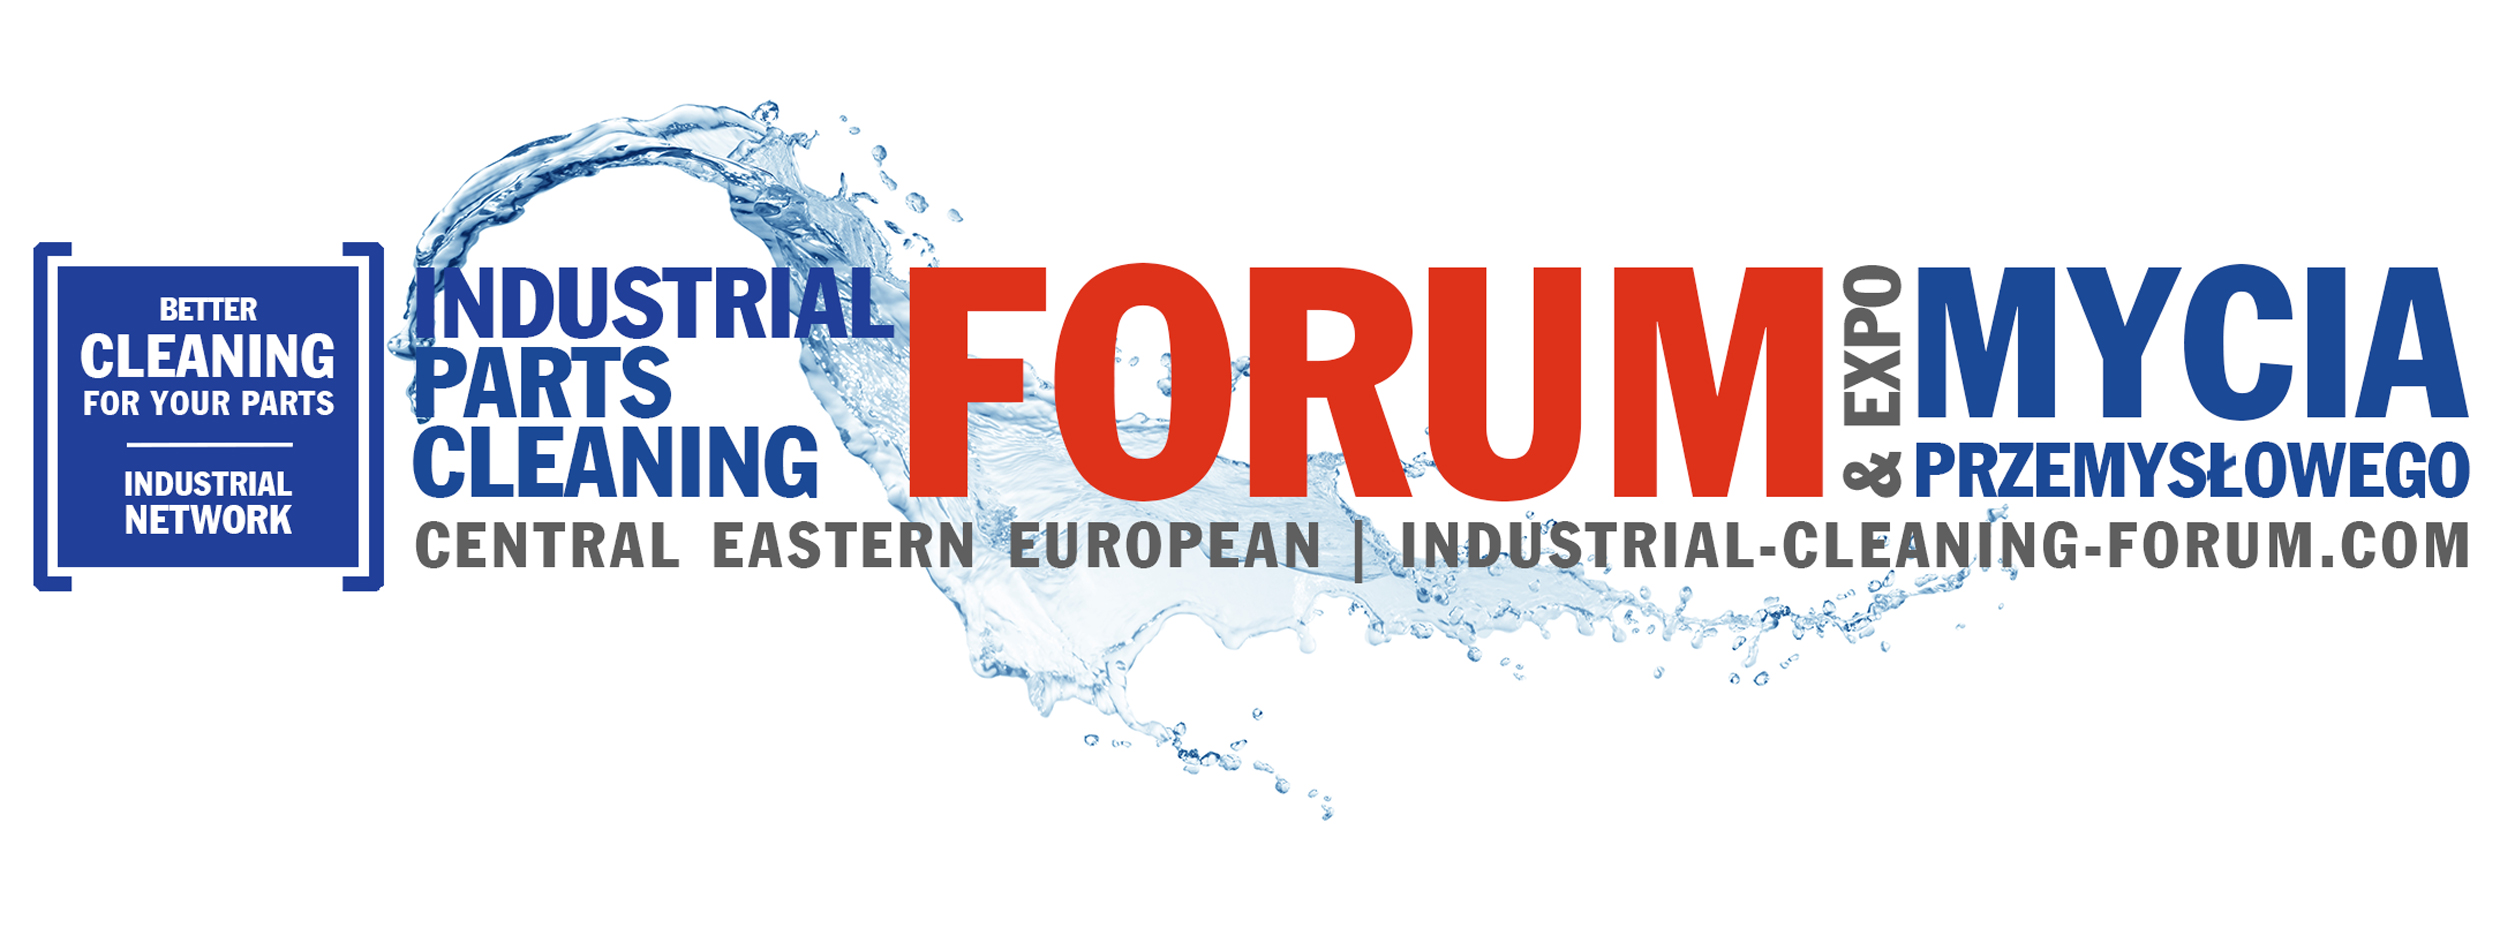 Industrial Parts Cleaning Forum 2020